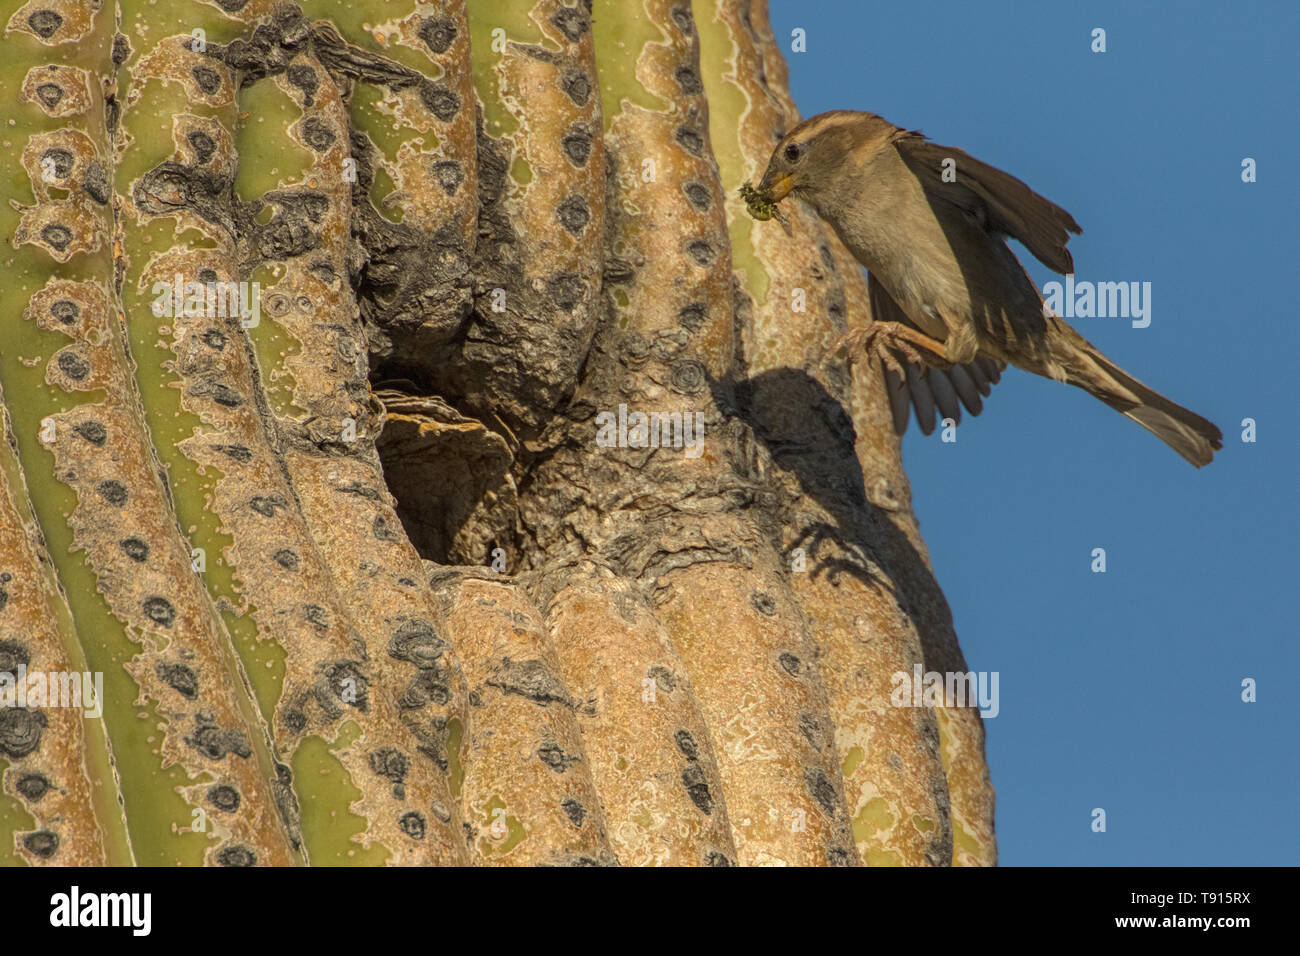 house sparrow (Passer domesticus), female, bringing food to nest in saguaro cactus, Sonoran desert Arizona, a species introduced to North America from Stock Photo